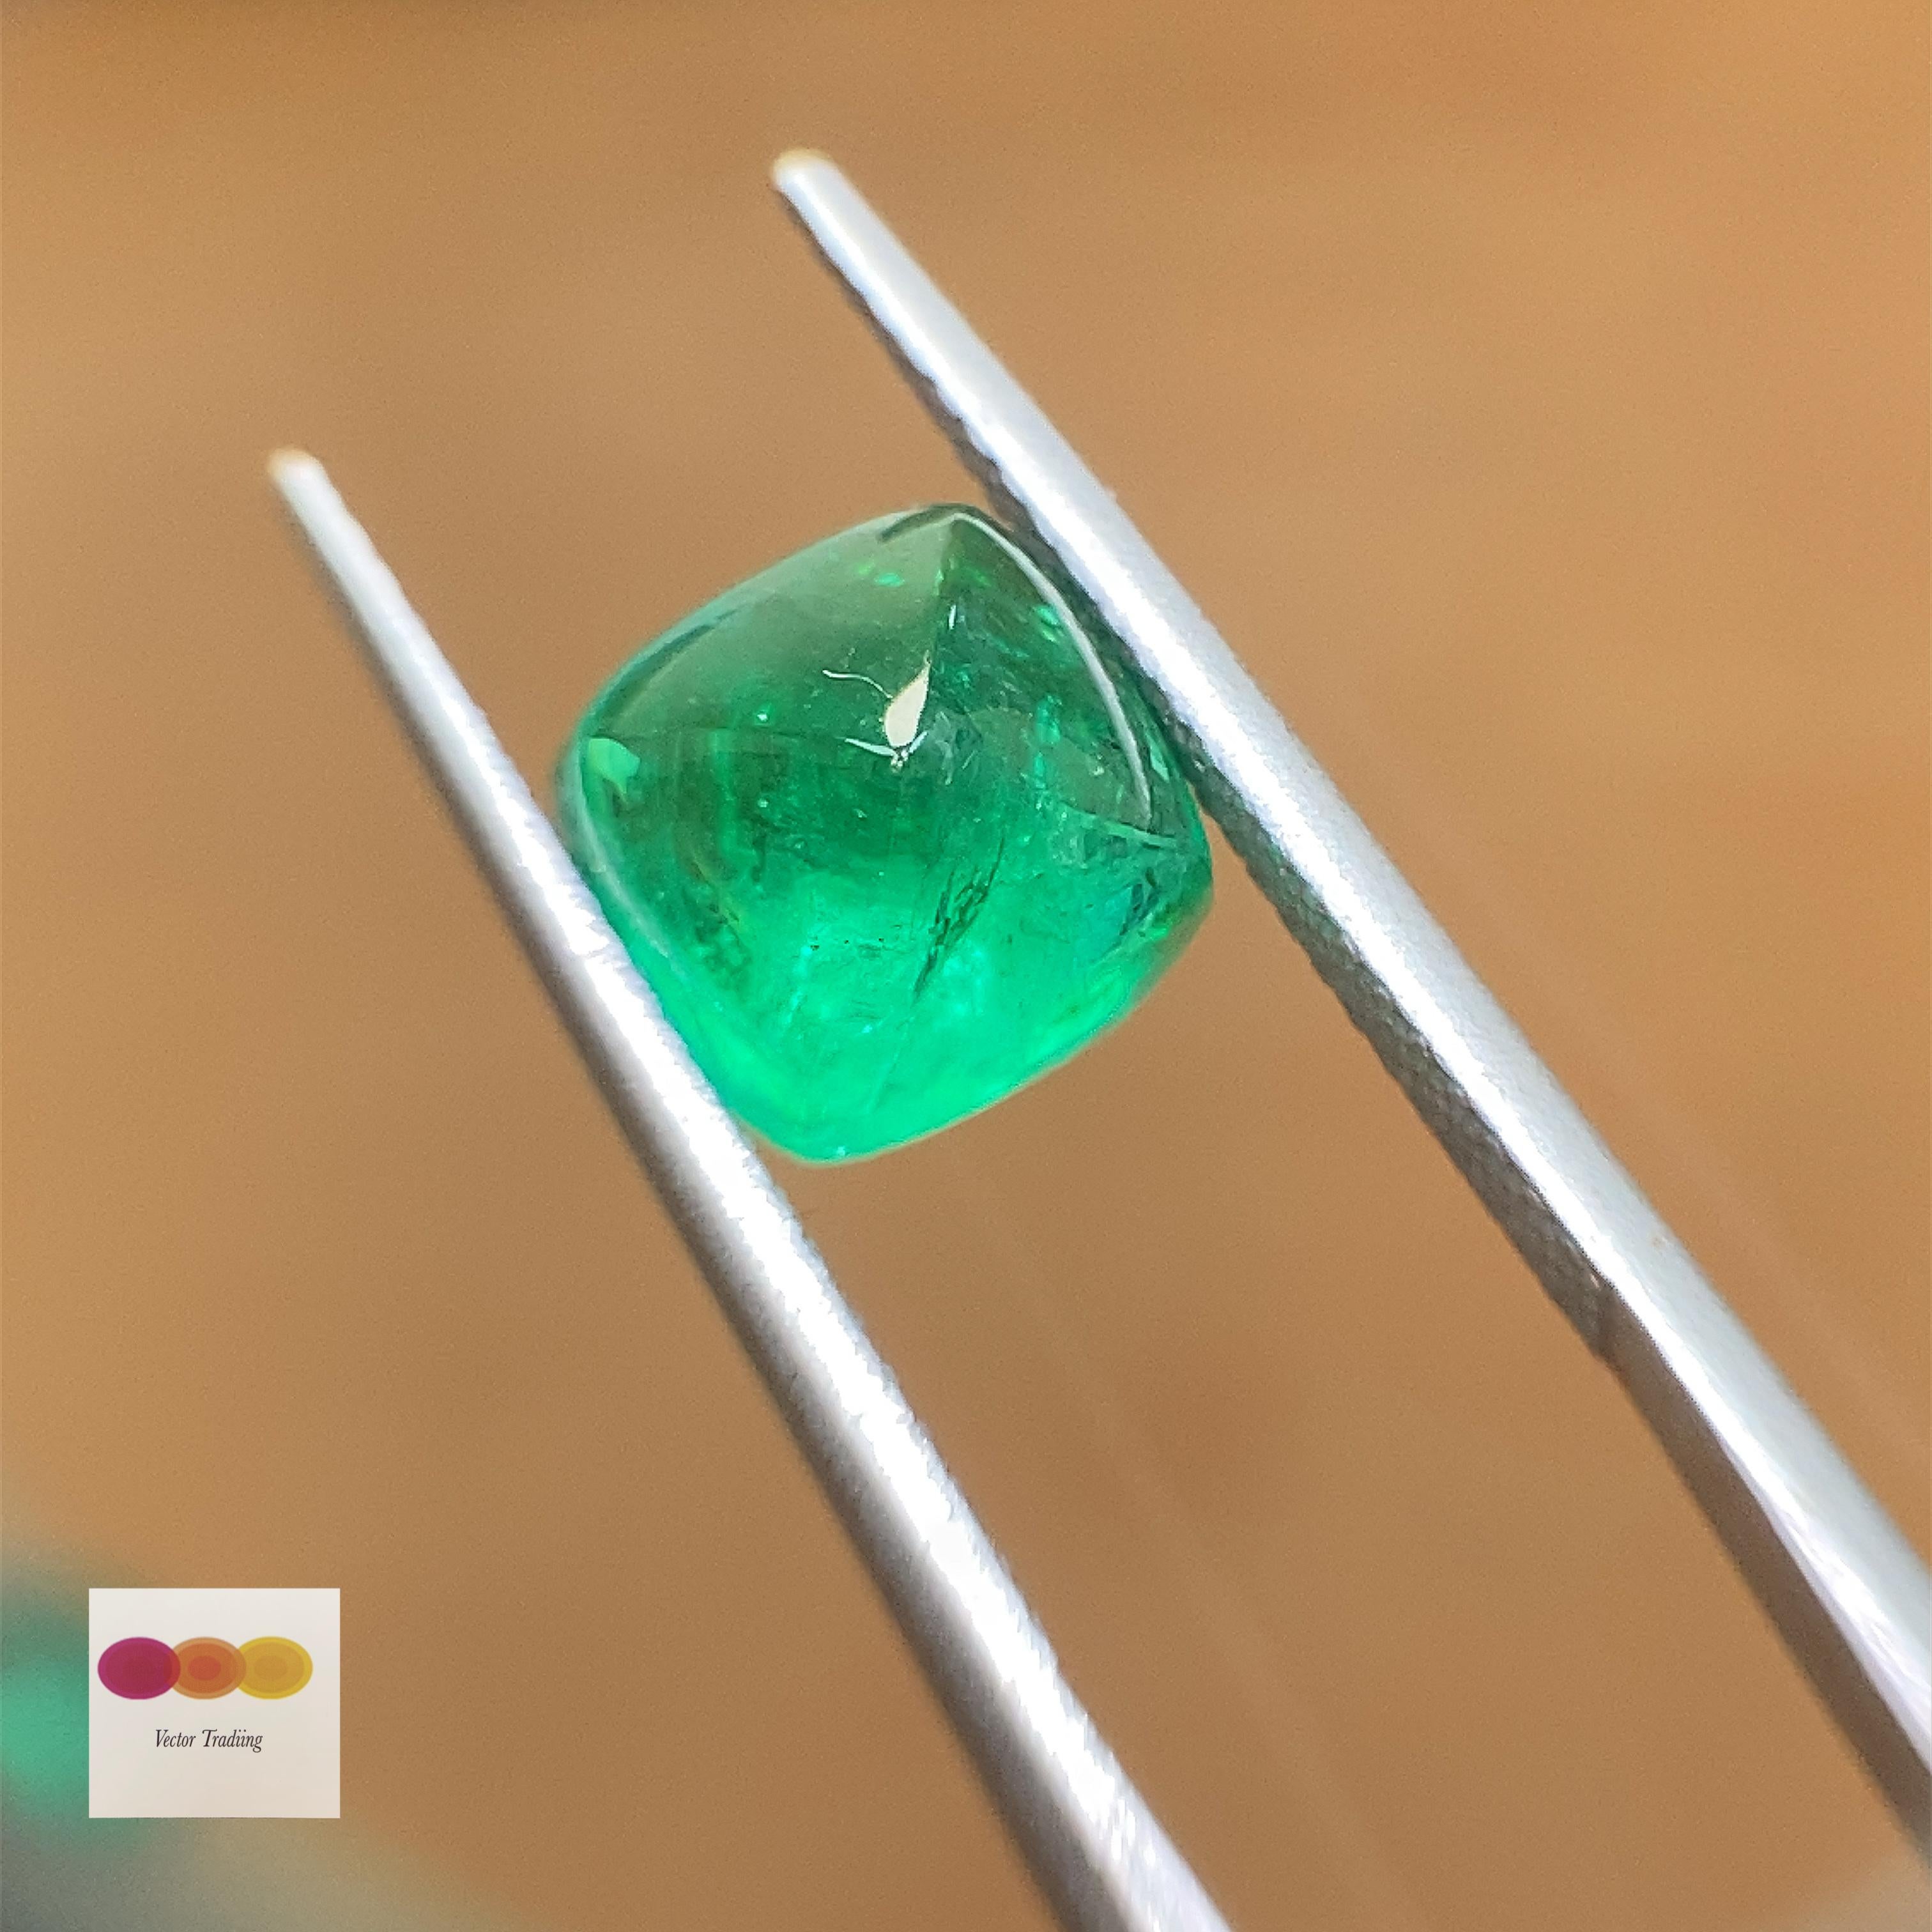 2.80 Carat Natural Zambian Vivid Green Emerald Sugarloaf:

A gorgeous gem, it is a 2.80 carat natural Zambian vivid green emerald sugarloaf. Hailing from the majestic Zambian mines in Africa, the emerald possesses a vivid green colour saturation,